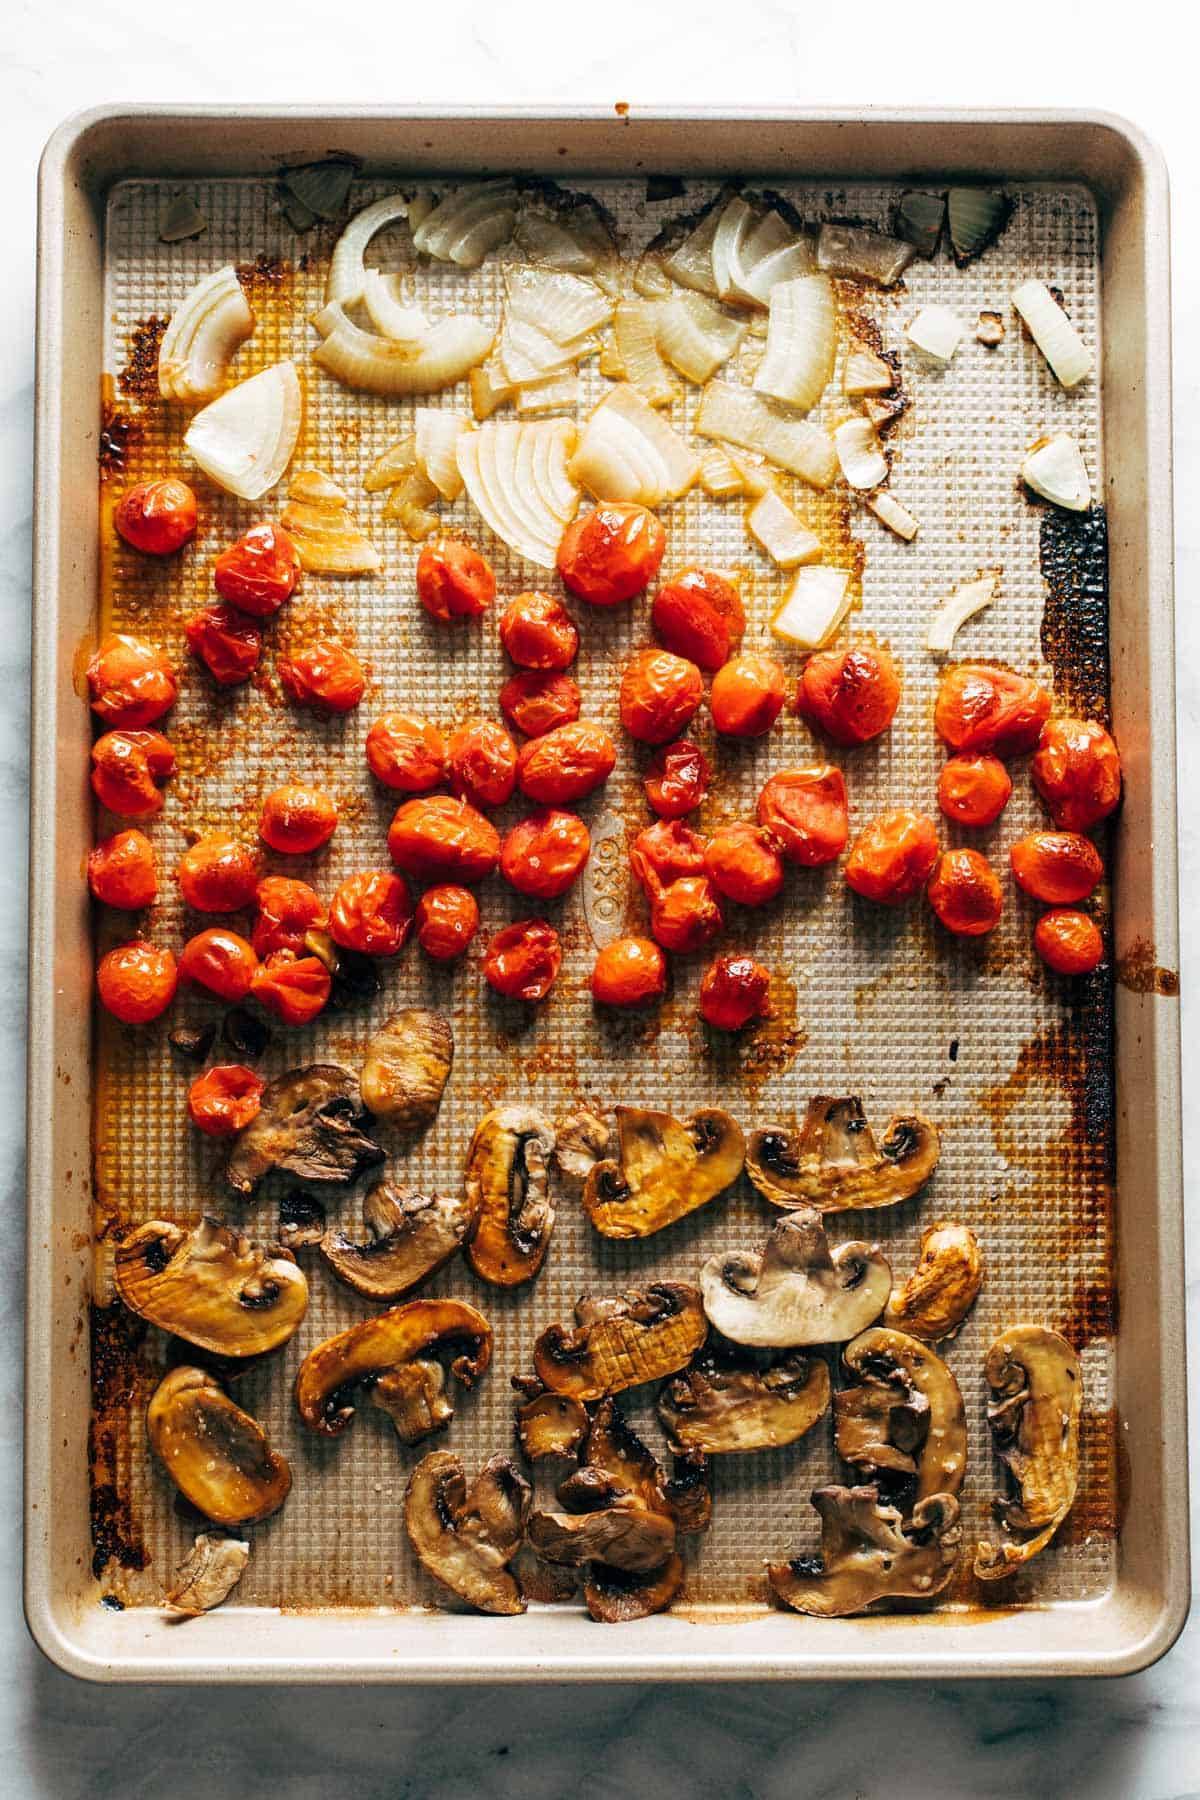 Ingredients for puttanesca on a sheet pan.